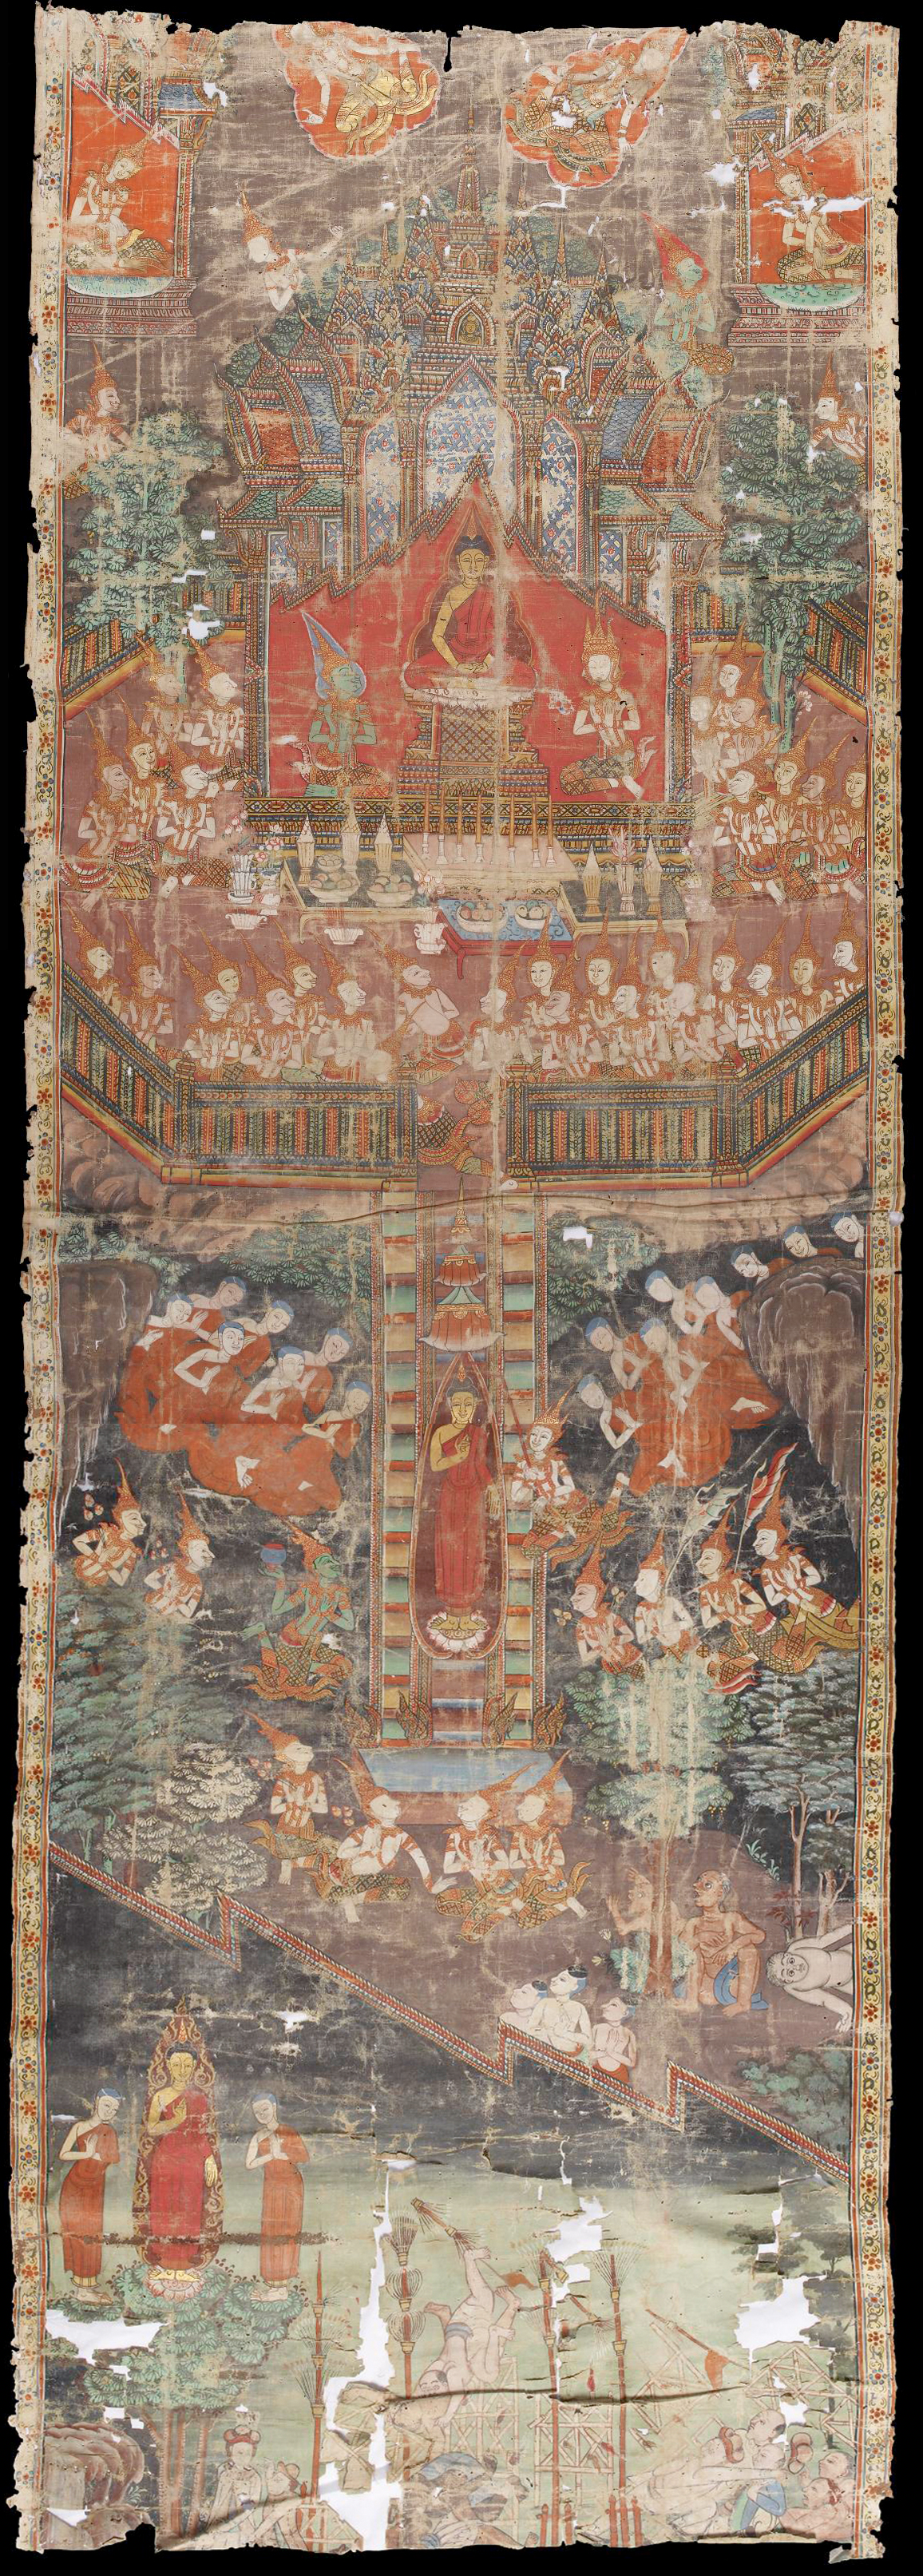 Image for Scenes from the Life of the Buddha with the Buddha's Descent at Center